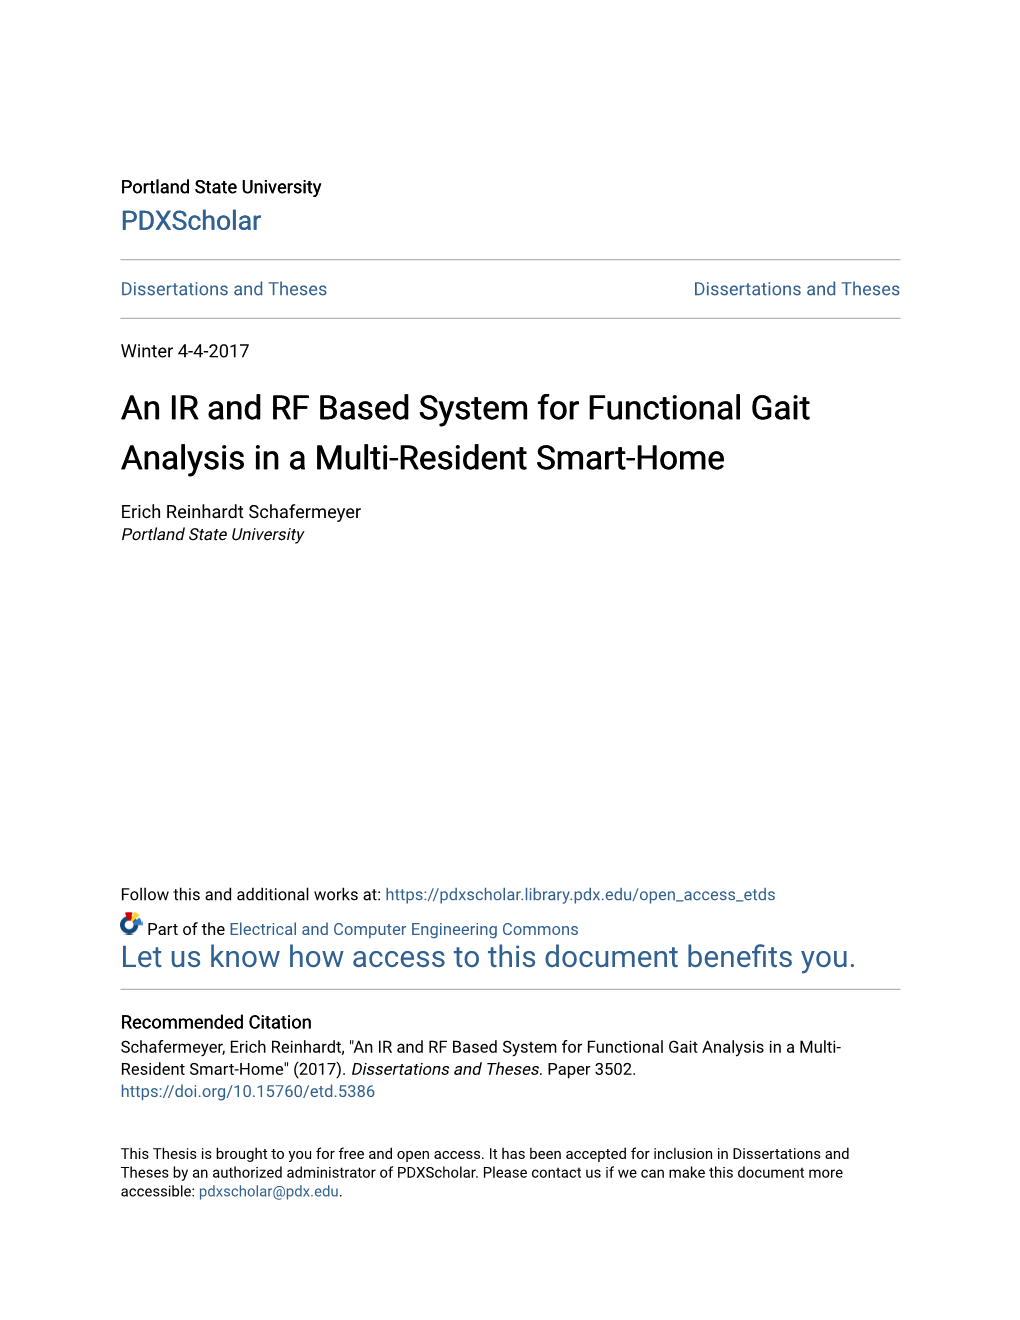 An IR and RF Based System for Functional Gait Analysis in a Multi-Resident Smart-Home